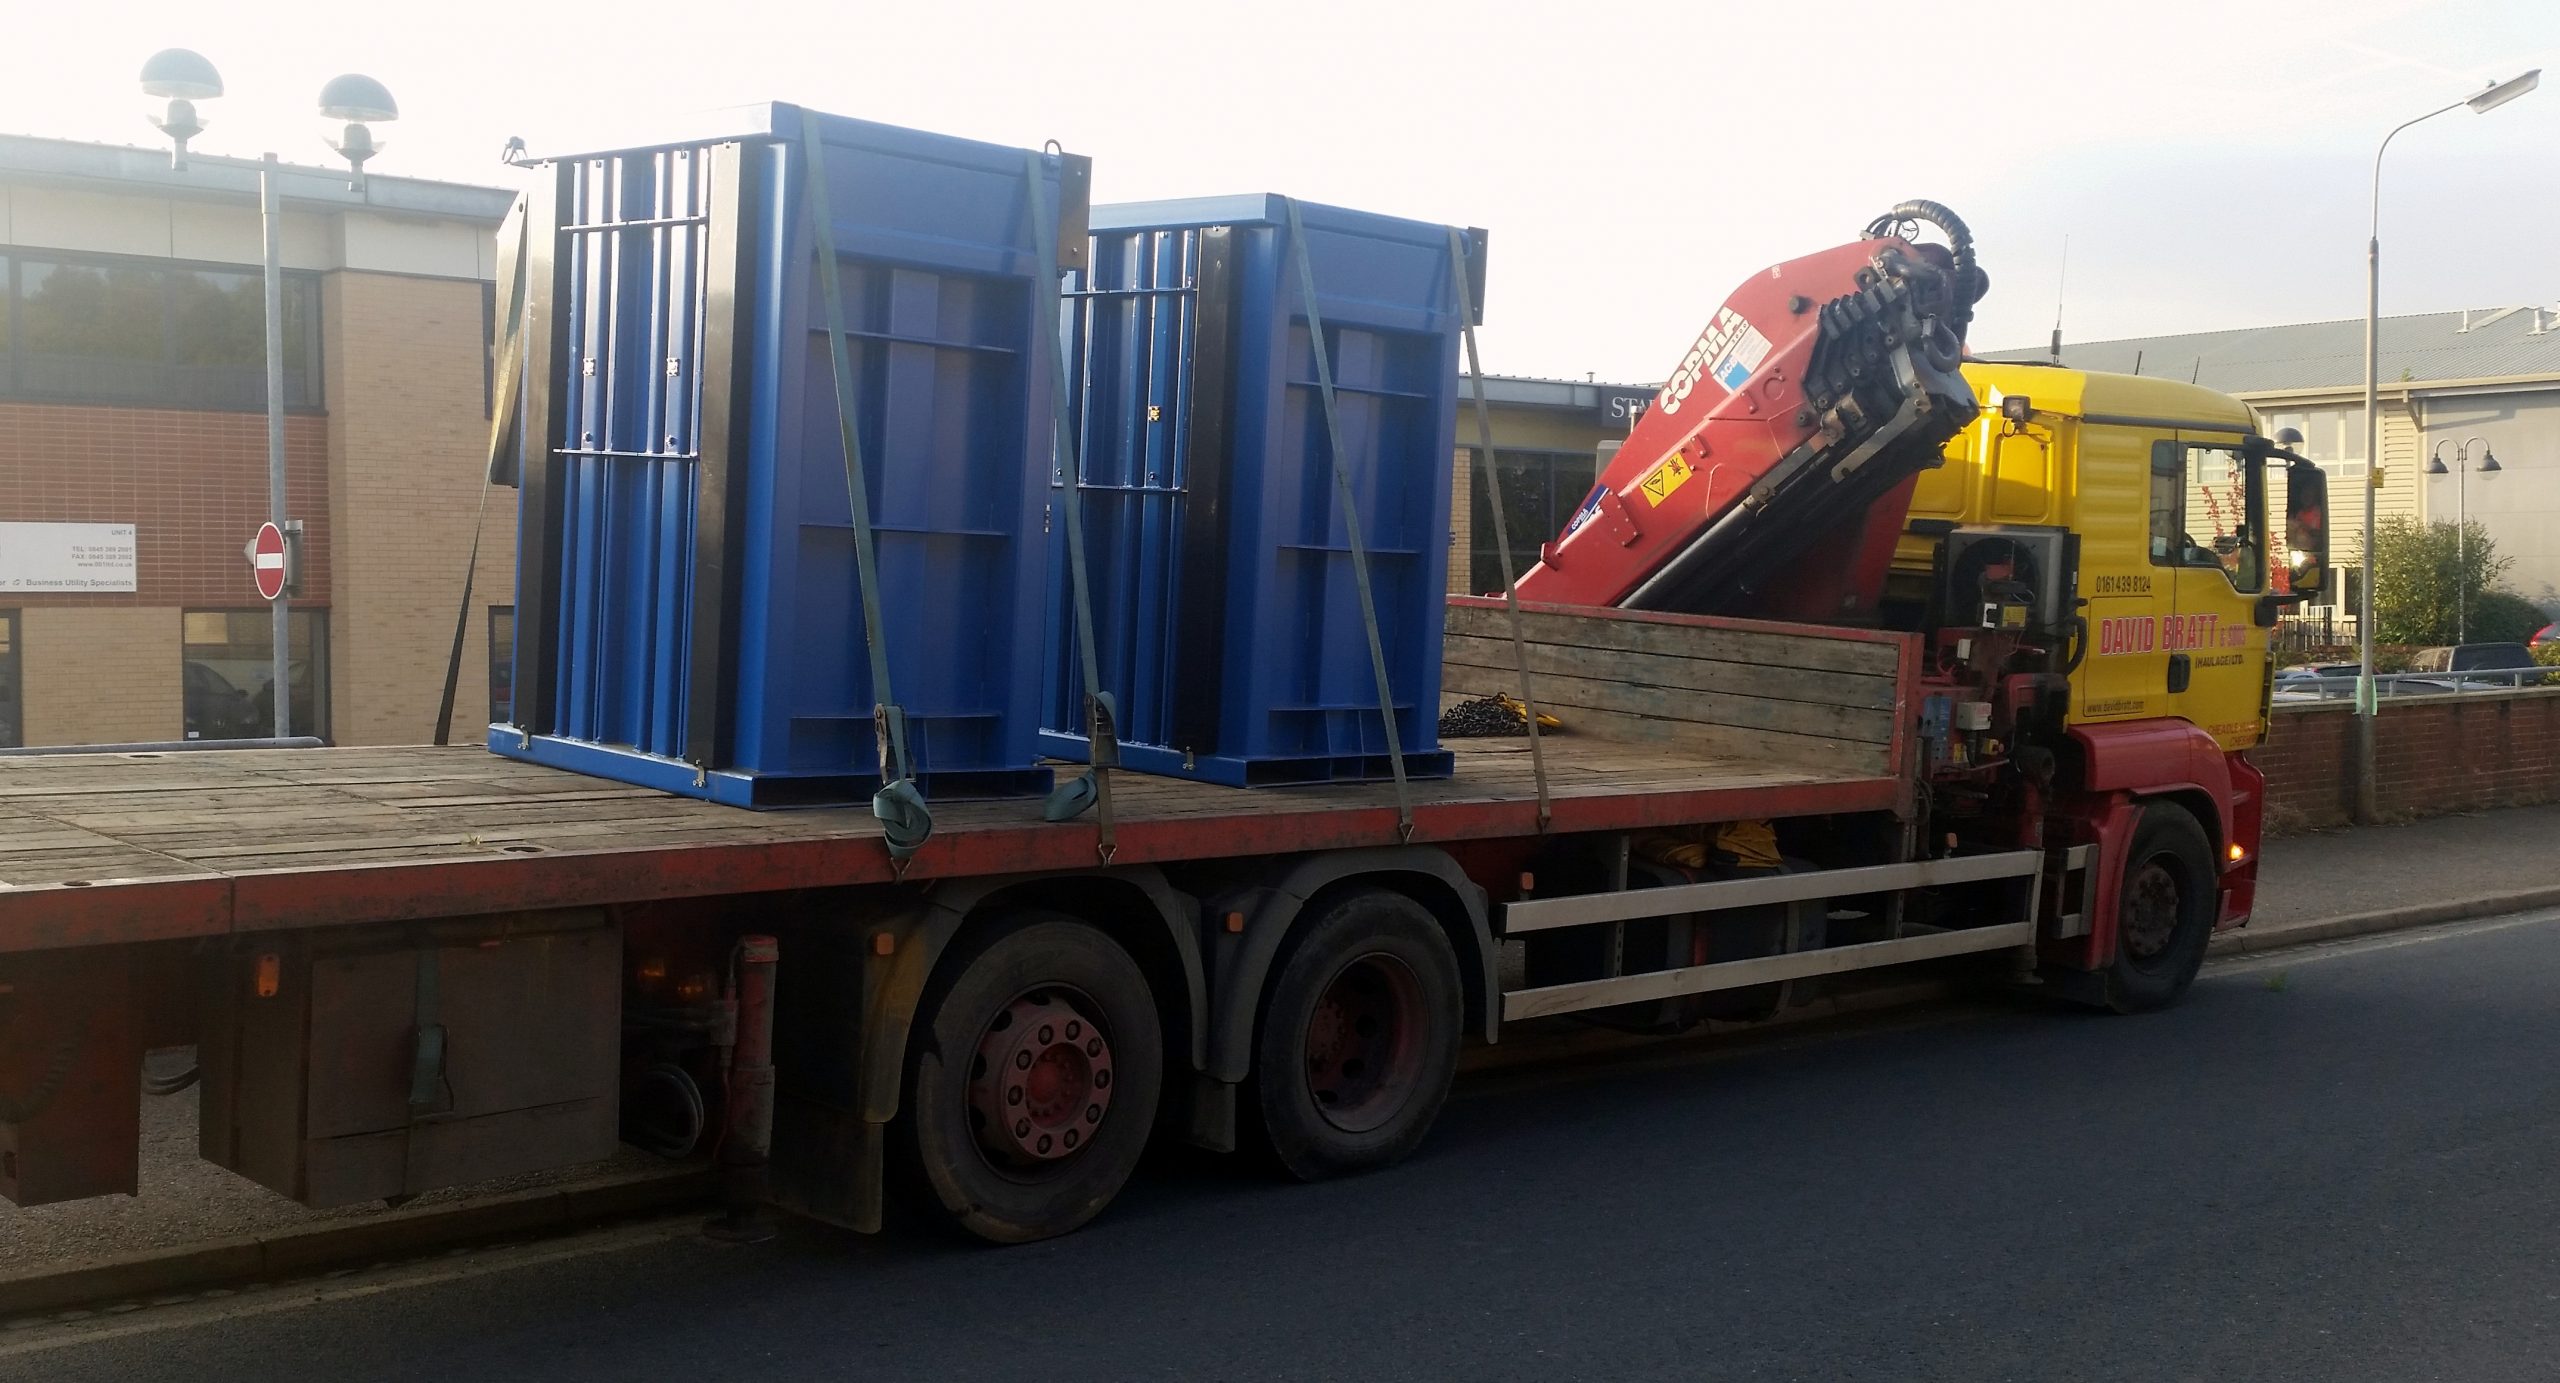 Delivery-of-Plastique-Balex-Balers-scaled